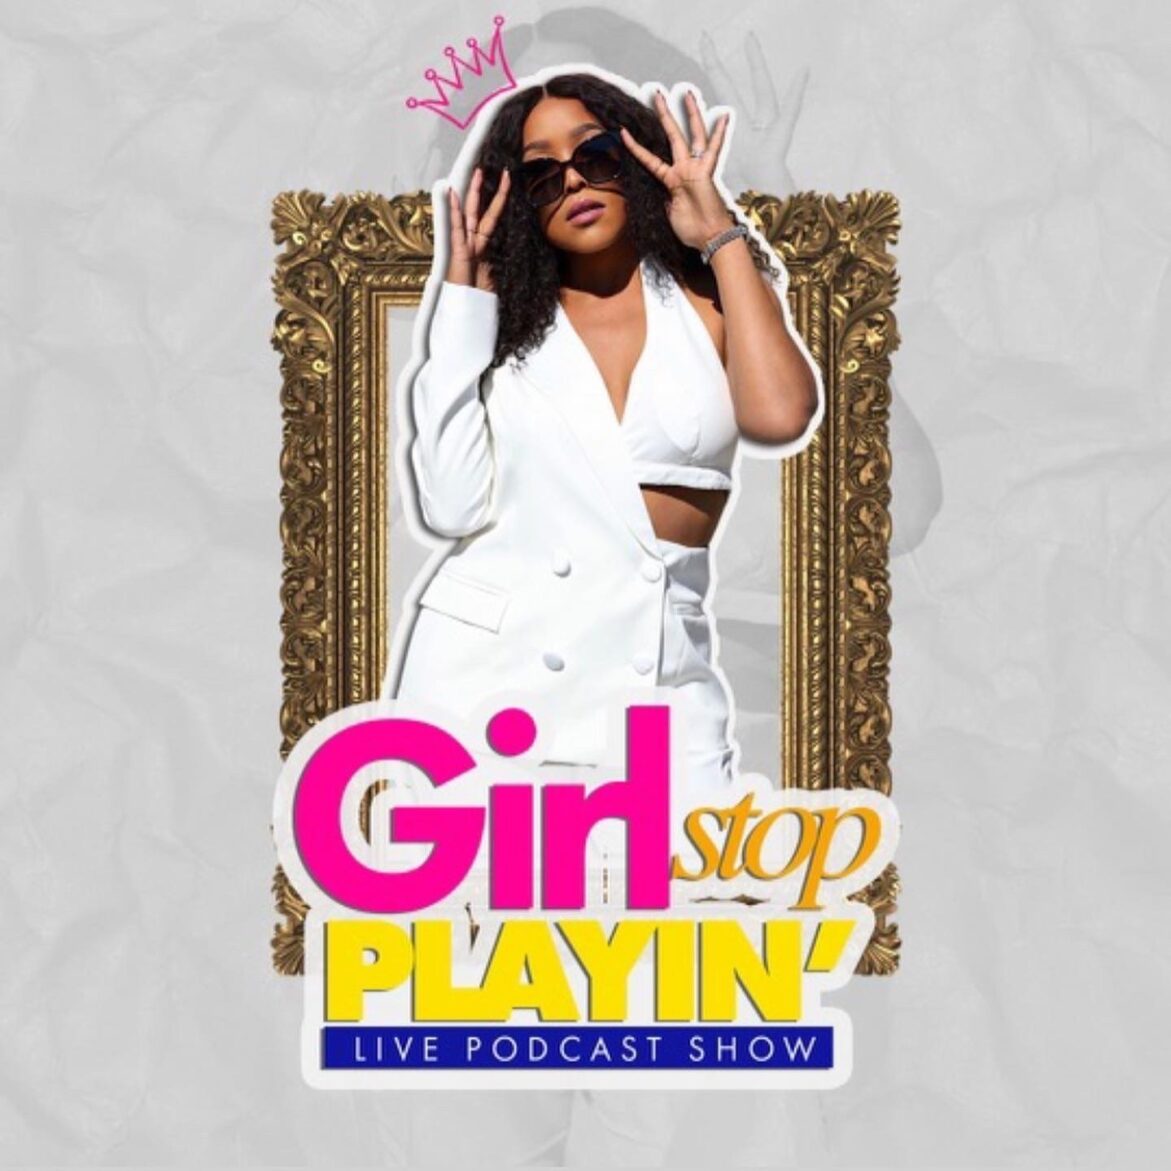 Black Podcasting - Learn How to Win as A Real Estate Agent| Juawana Colbert | Girl Stop Playin'| Episode 57